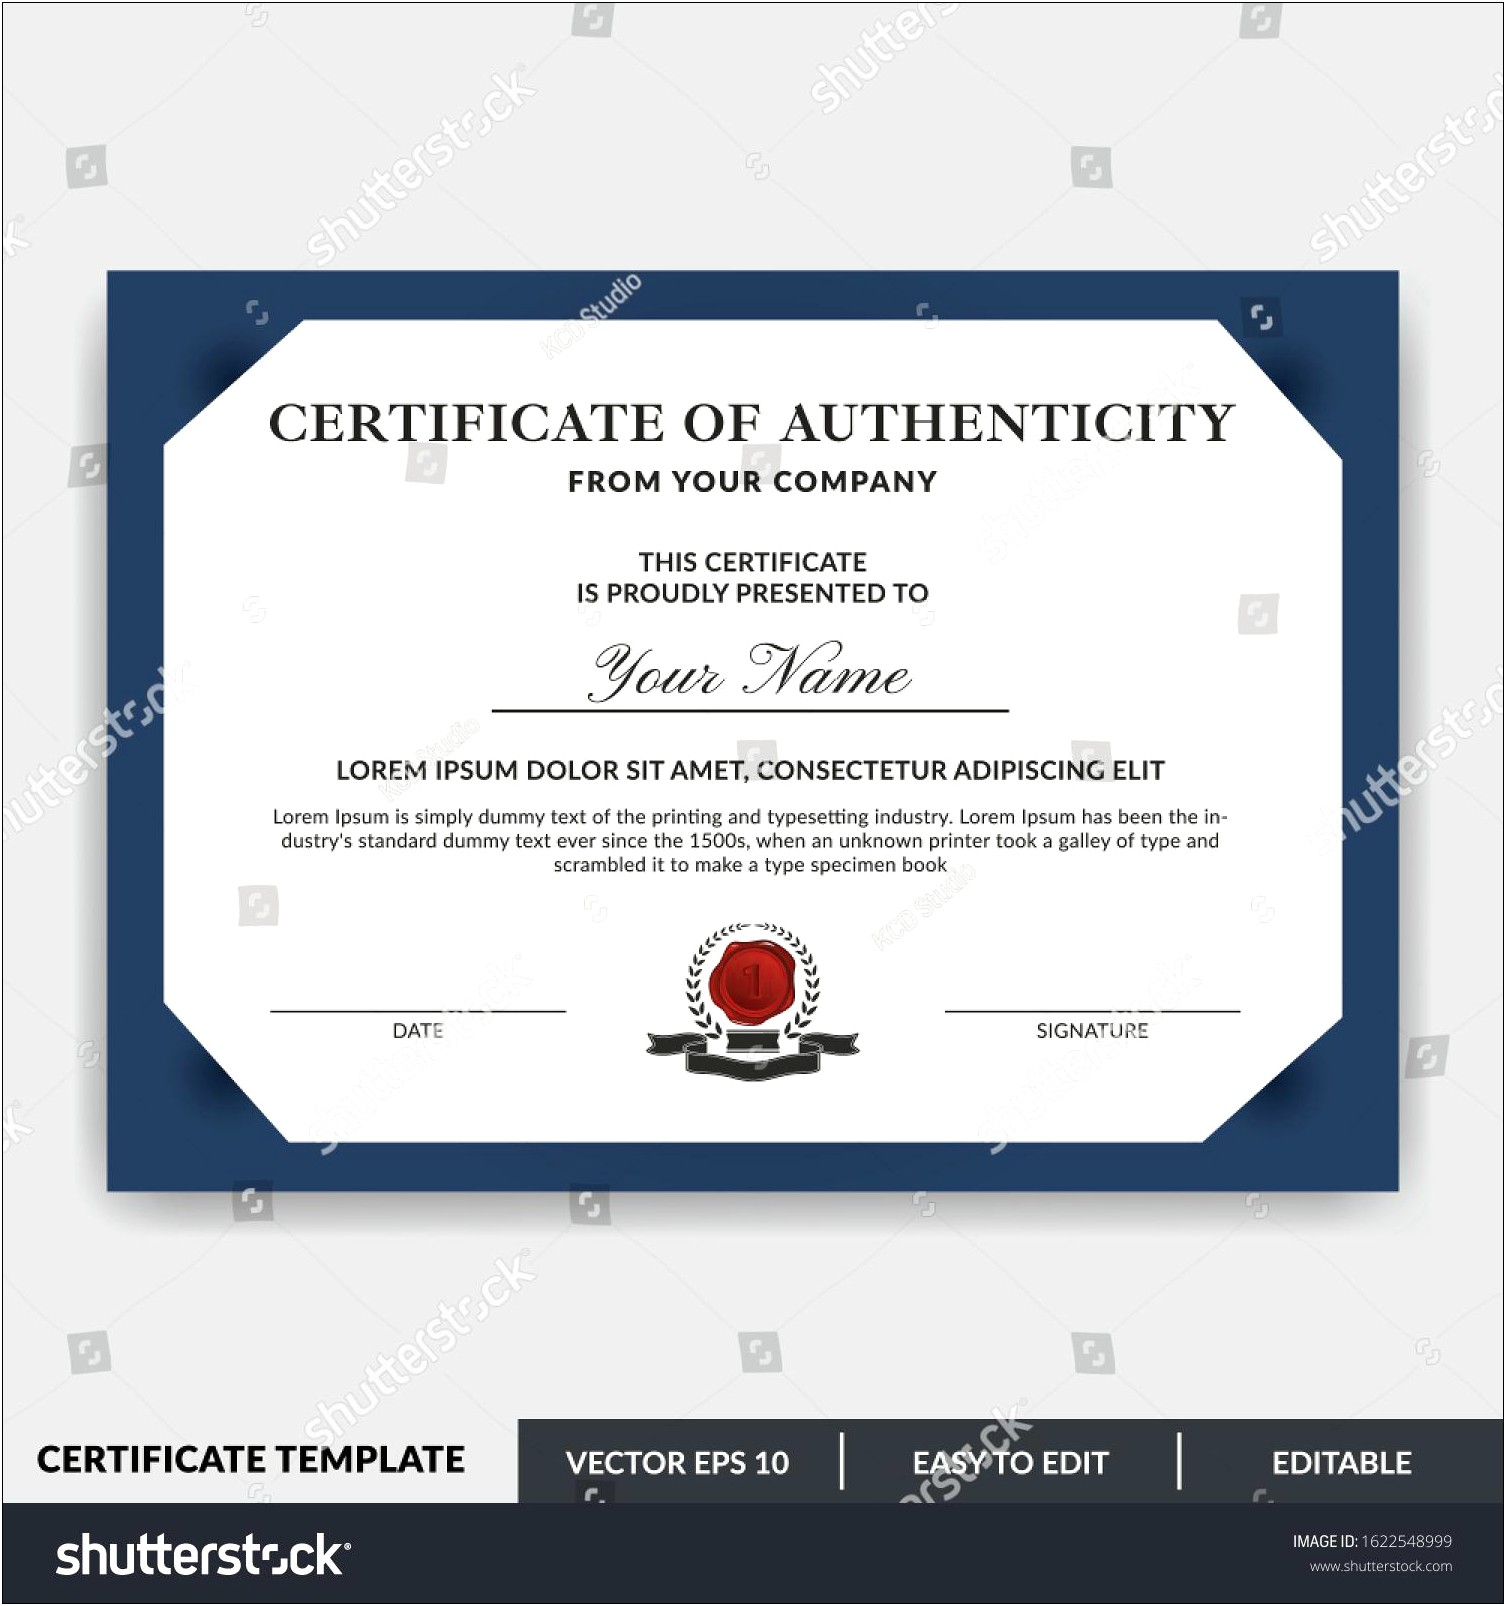 Certificate Of Authenticity Art Template Free